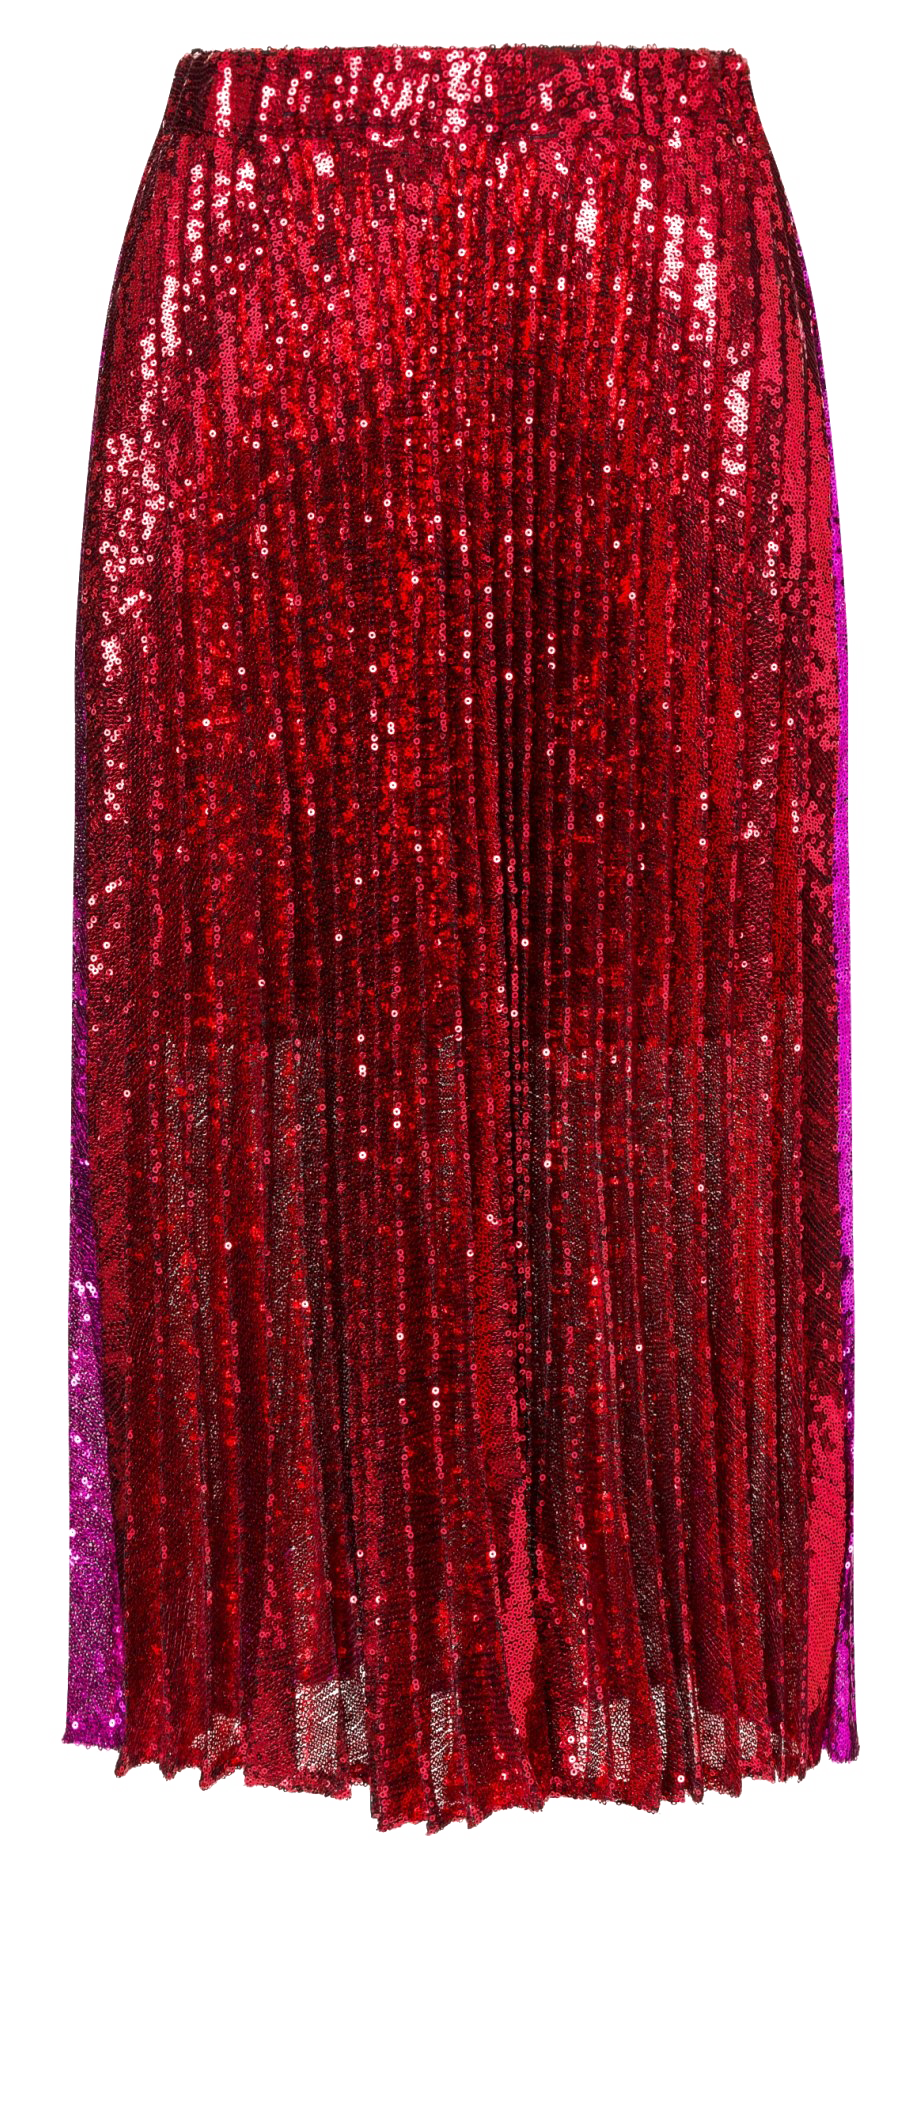 Sequin Skirt PNG Image Background